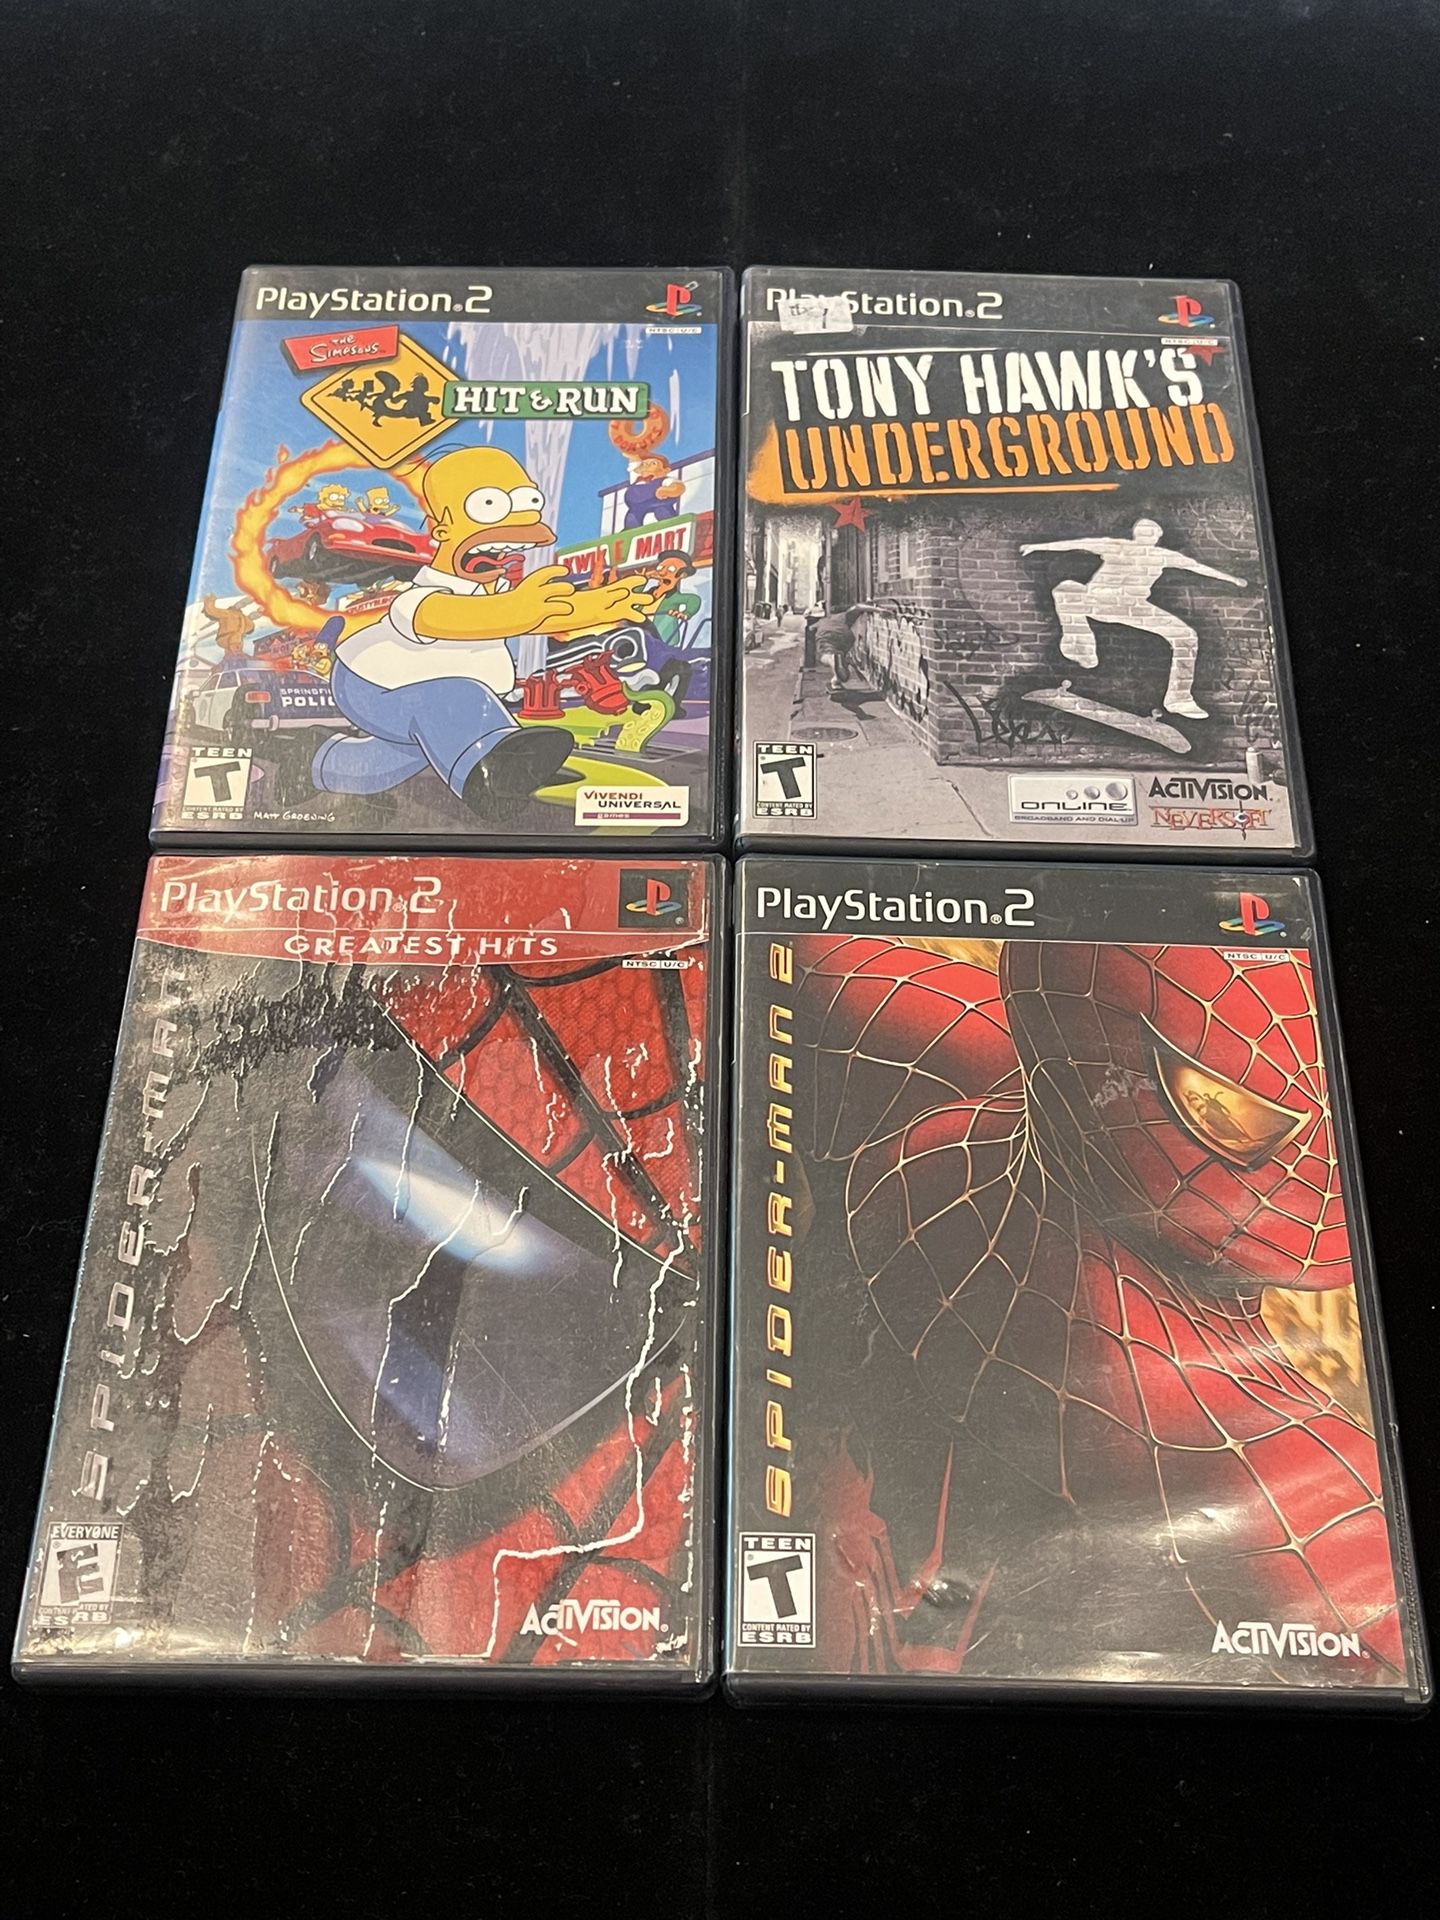 Sony PlayStation 2 PS2 Game Disc Lot of 4 (THE SIMPSONS SPIDER-MAN TONY HAWK) Post Nintendo Era 